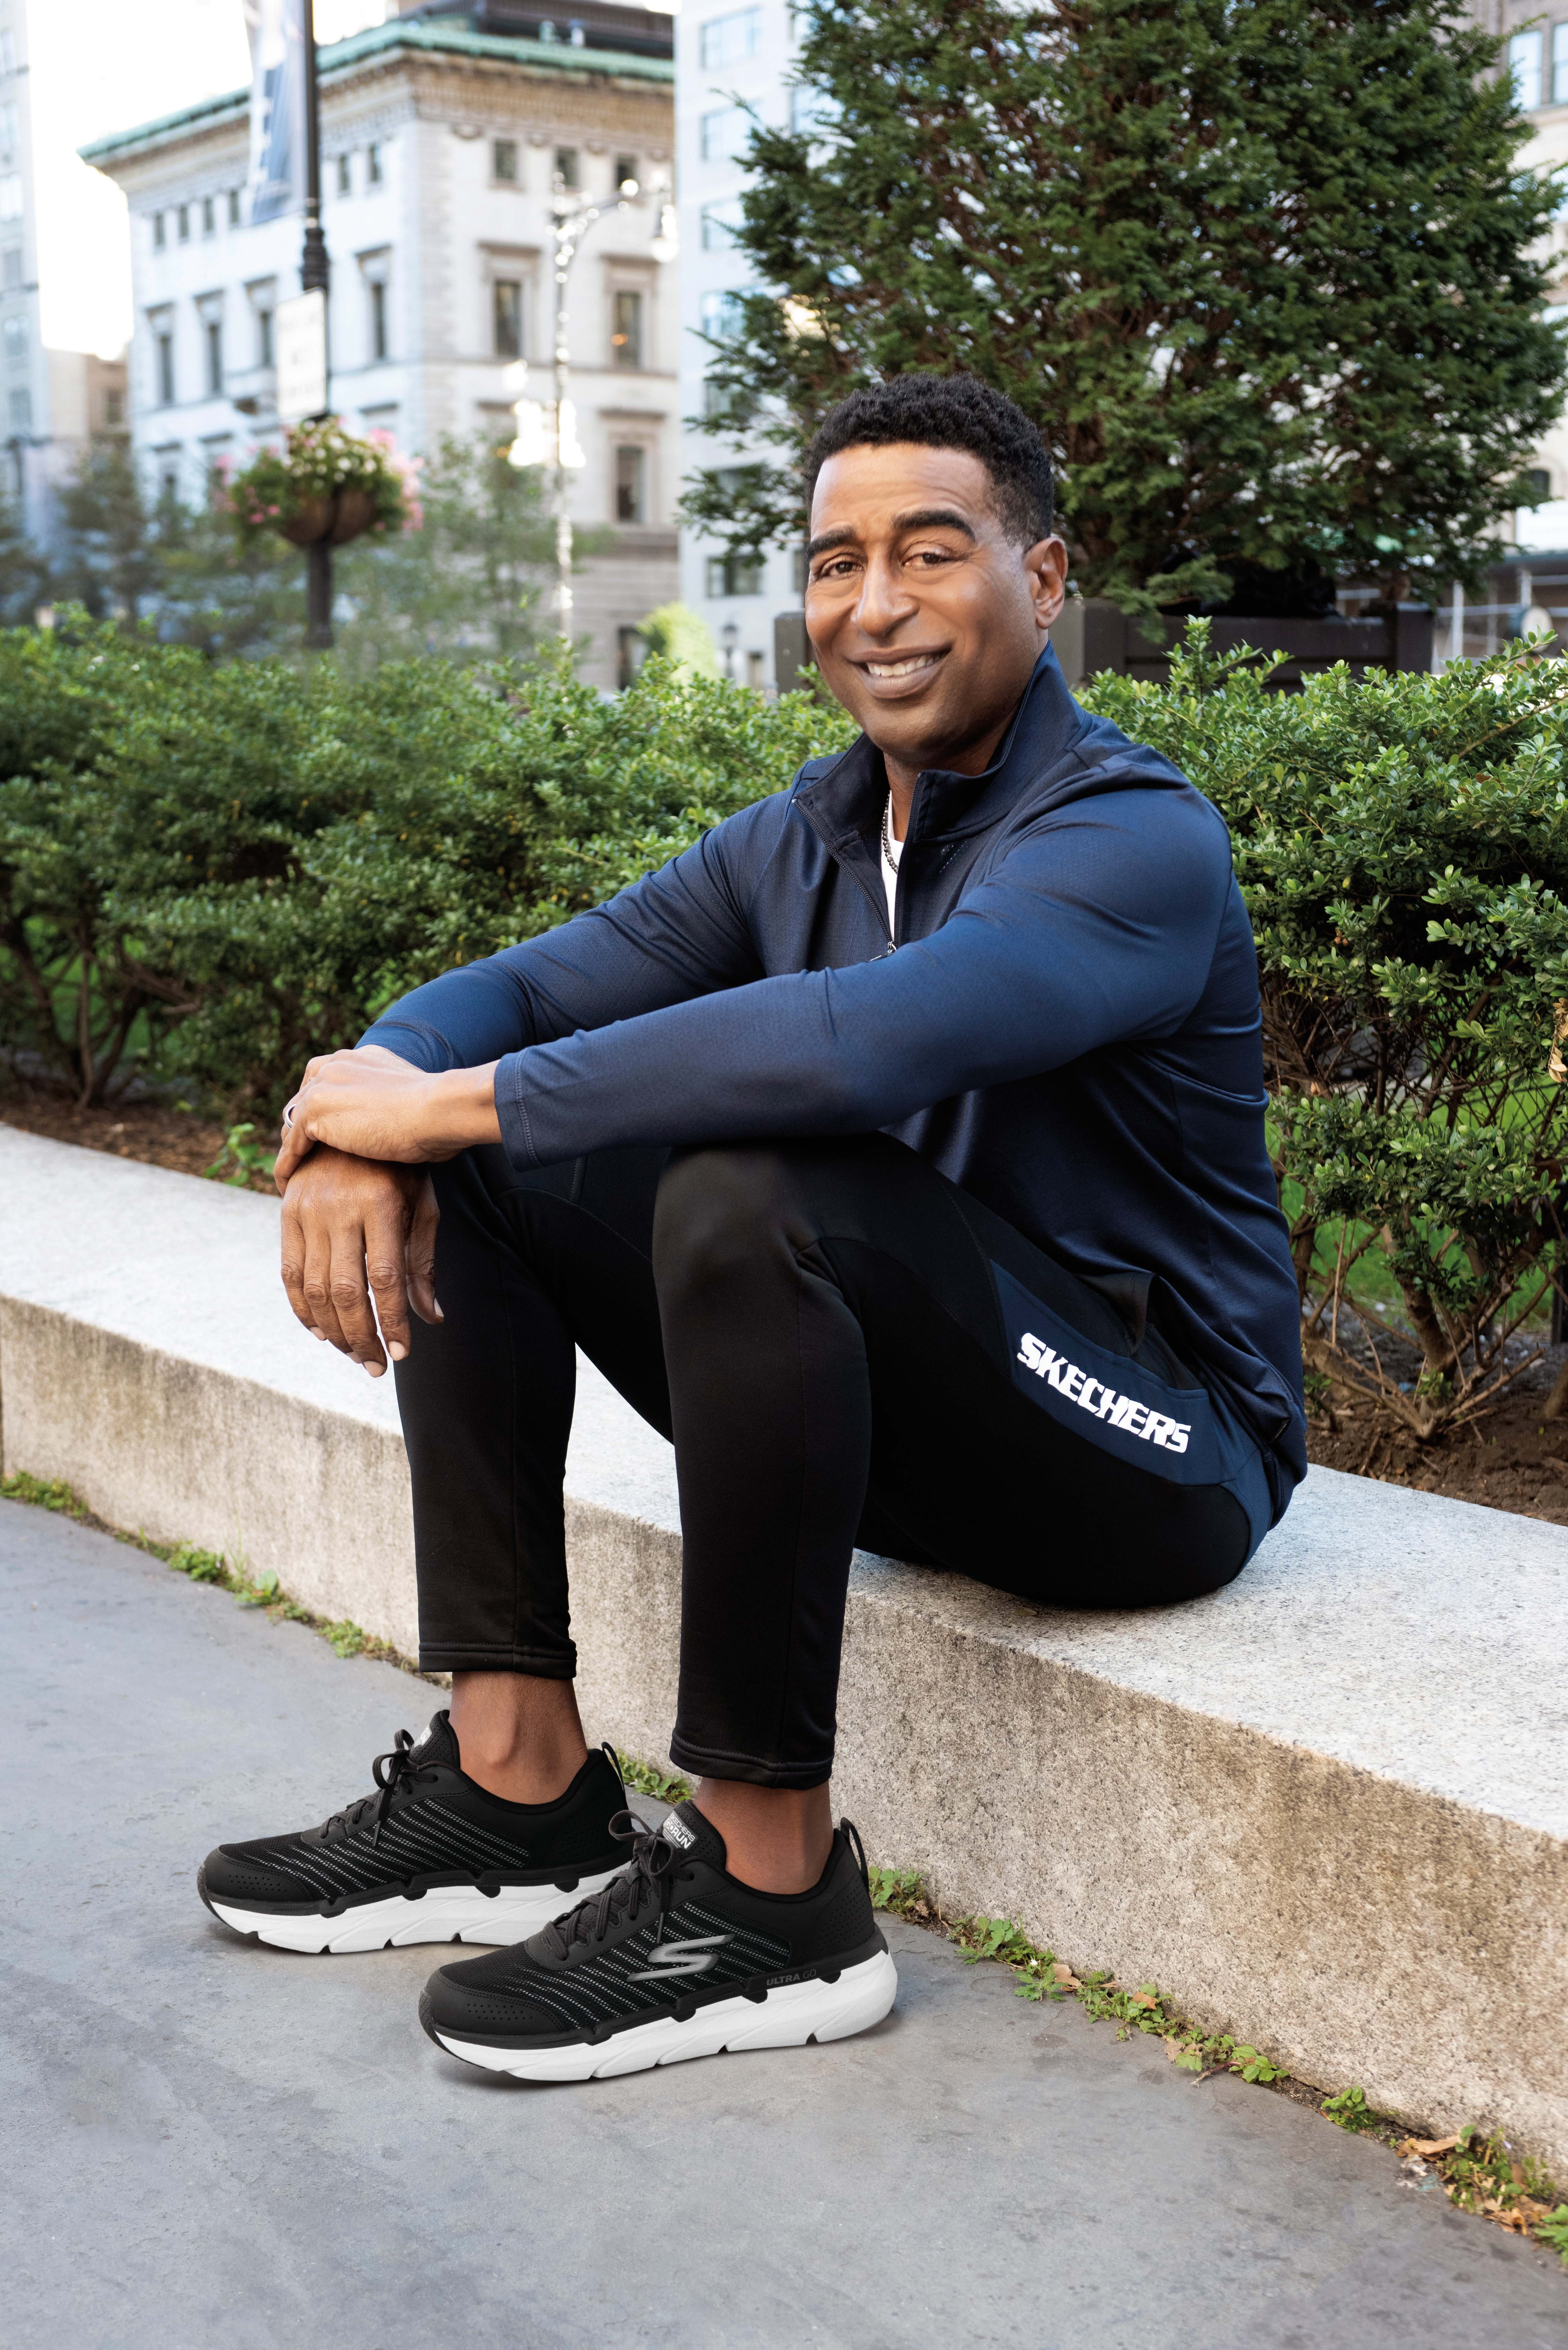 Afgeschaft dubbellaag neus NFL Hall-of-Famer Cris Carter Goes the Distance for Skechers | Business Wire